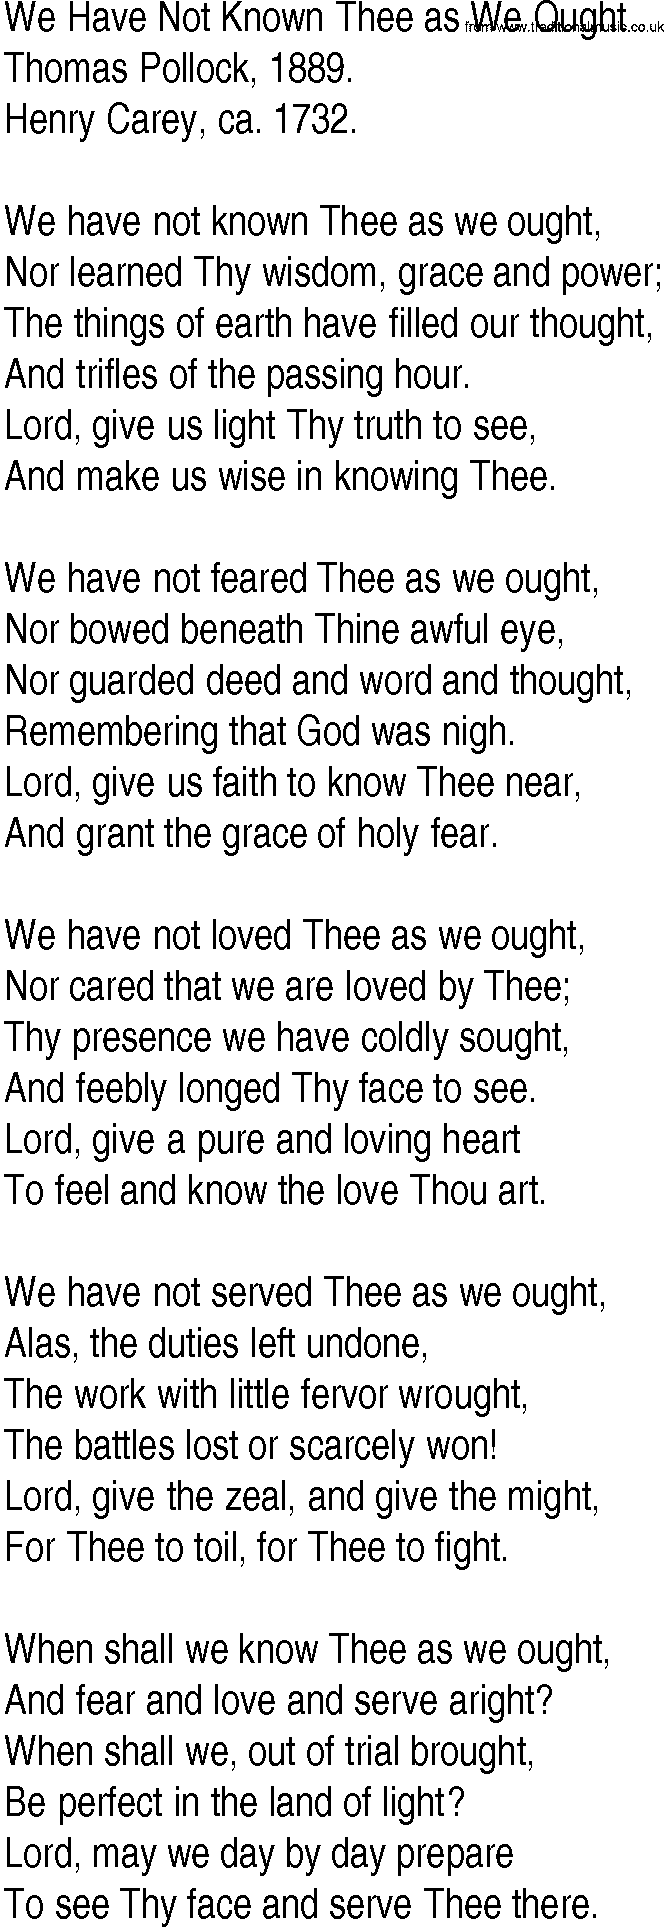 Hymn and Gospel Song: We Have Not Known Thee as We Ought by Thomas Pollock lyrics